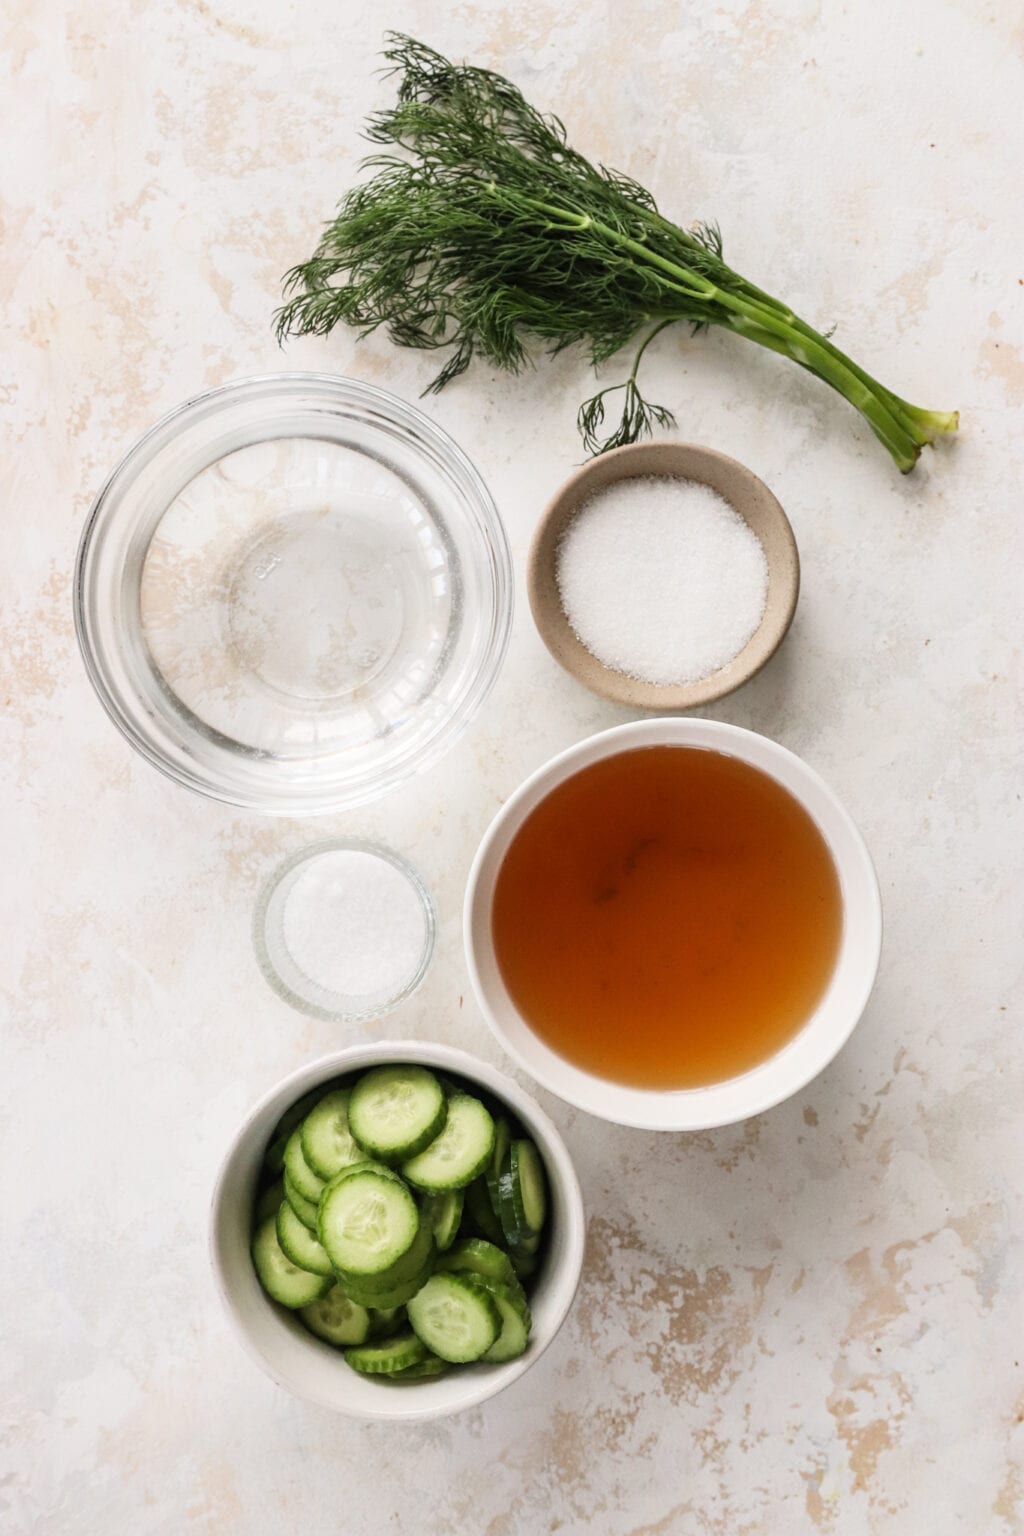 Ingredients for Apple Cider Vinegar Cucumber Pickles with Dill in small bowls, including cucumbers, hot water, apple cider vinegar or white vinegar, salt, sugar, fresh dill